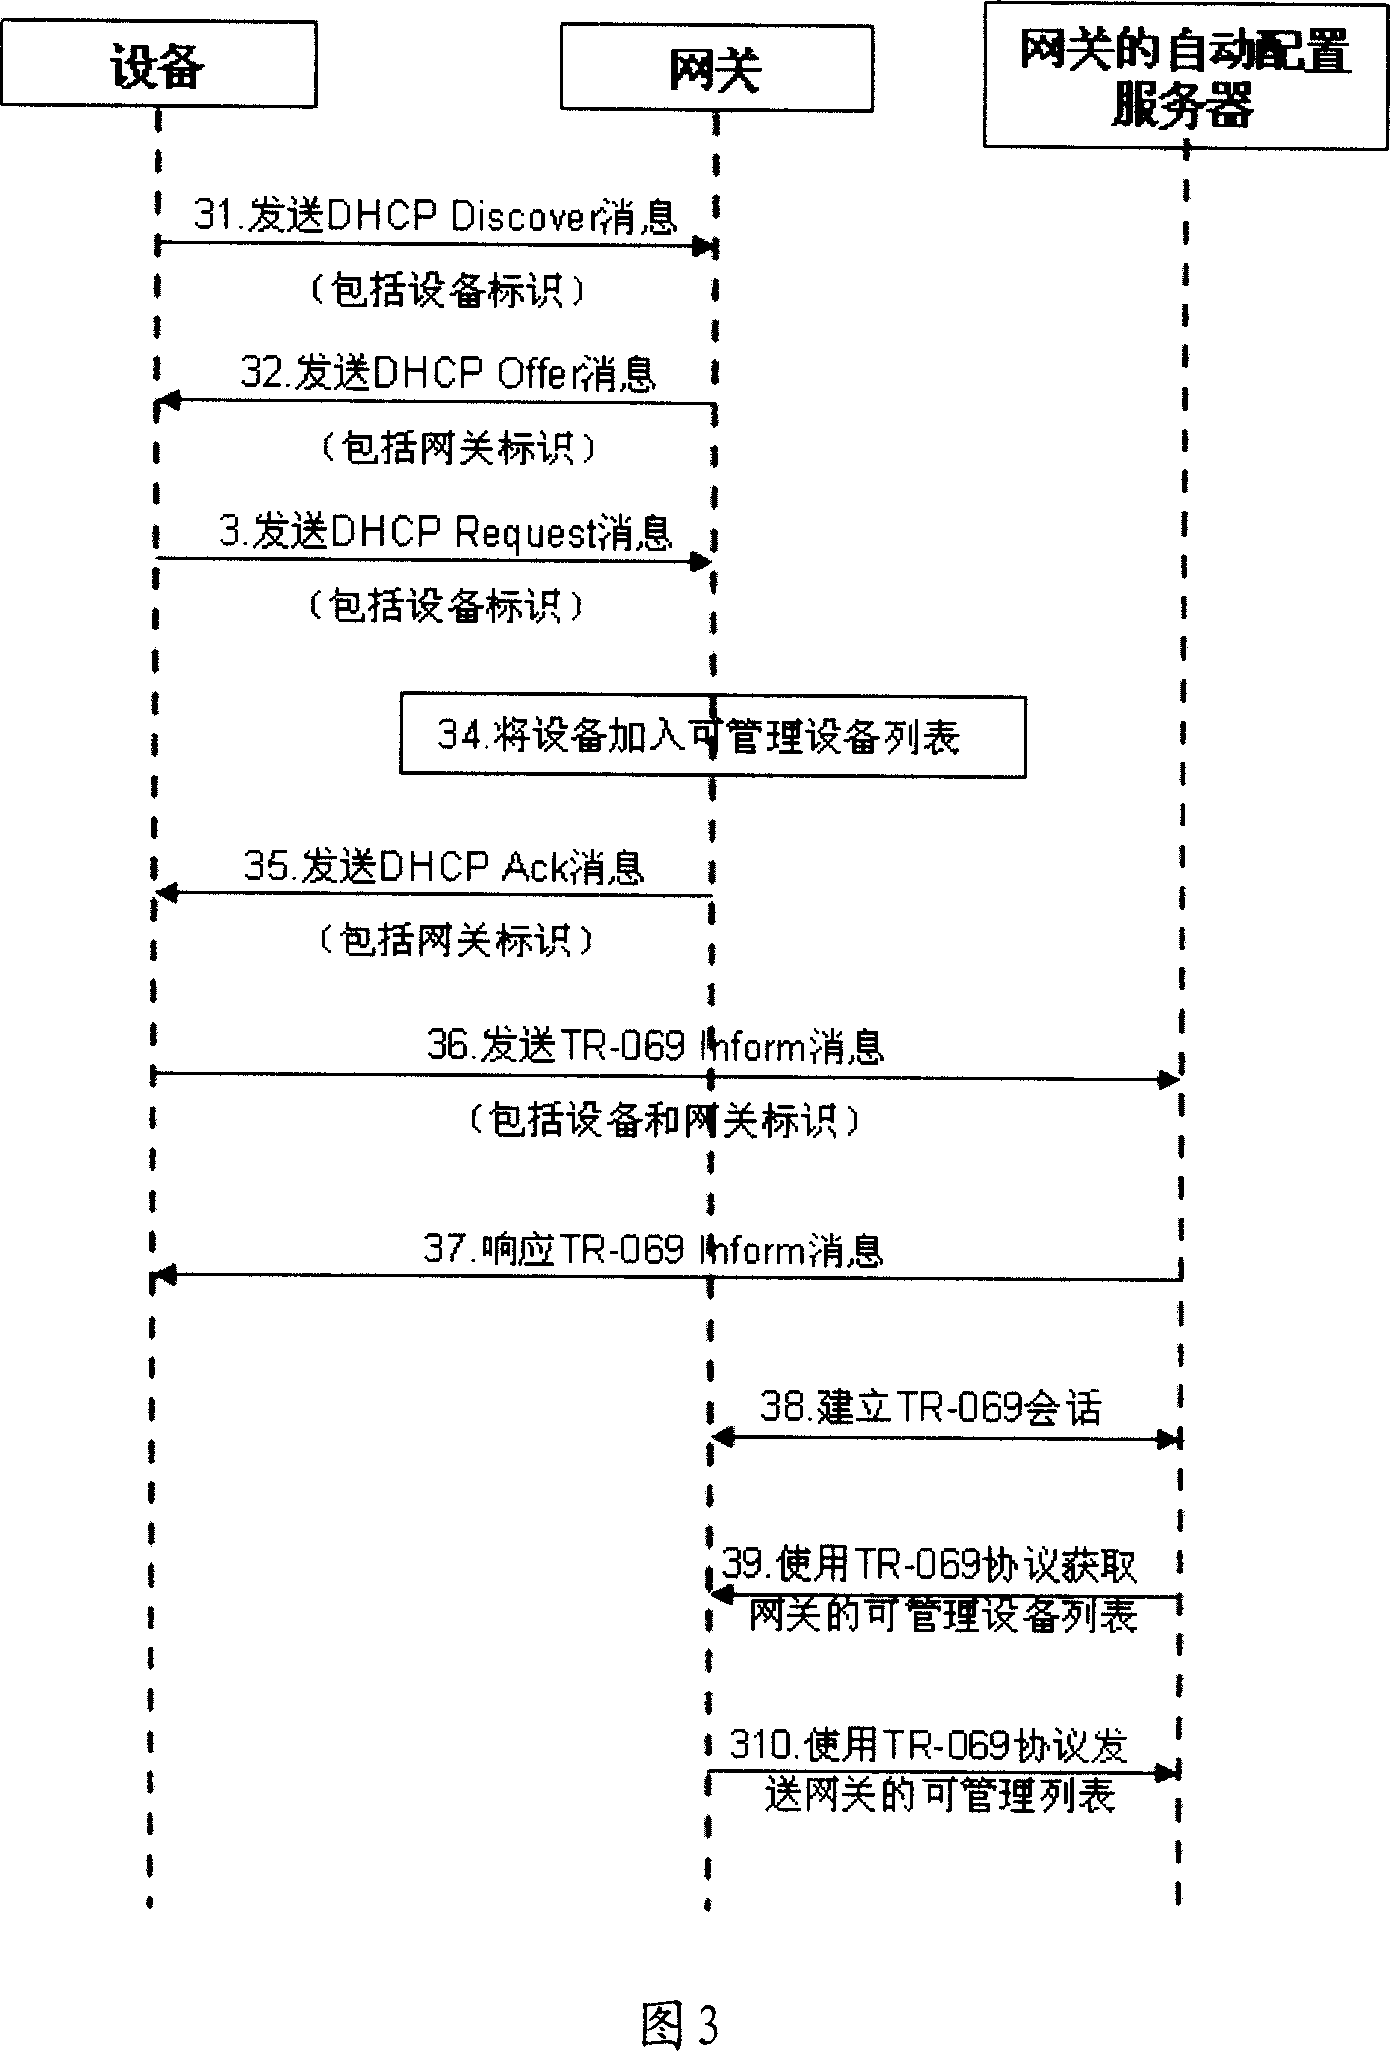 Method and system for managing configuration of network devices